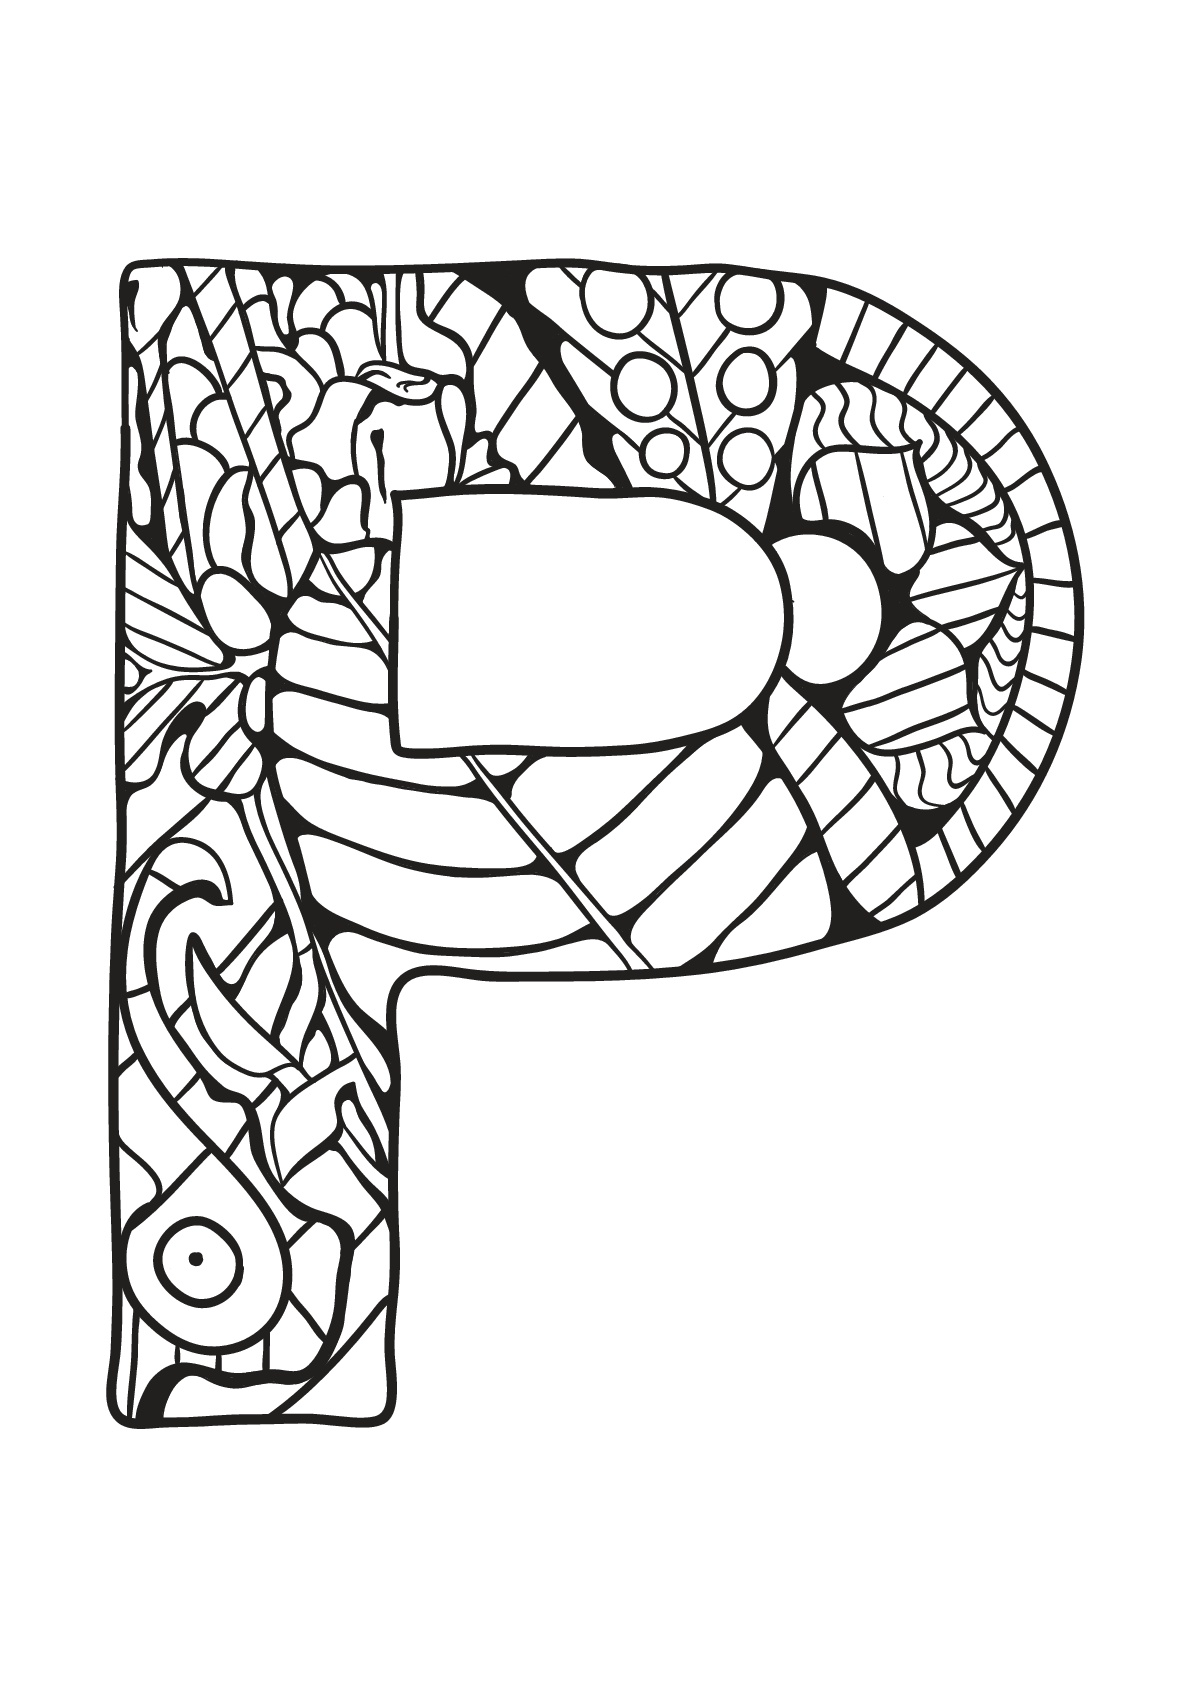 Alphabet coloring page with few details for kids : P